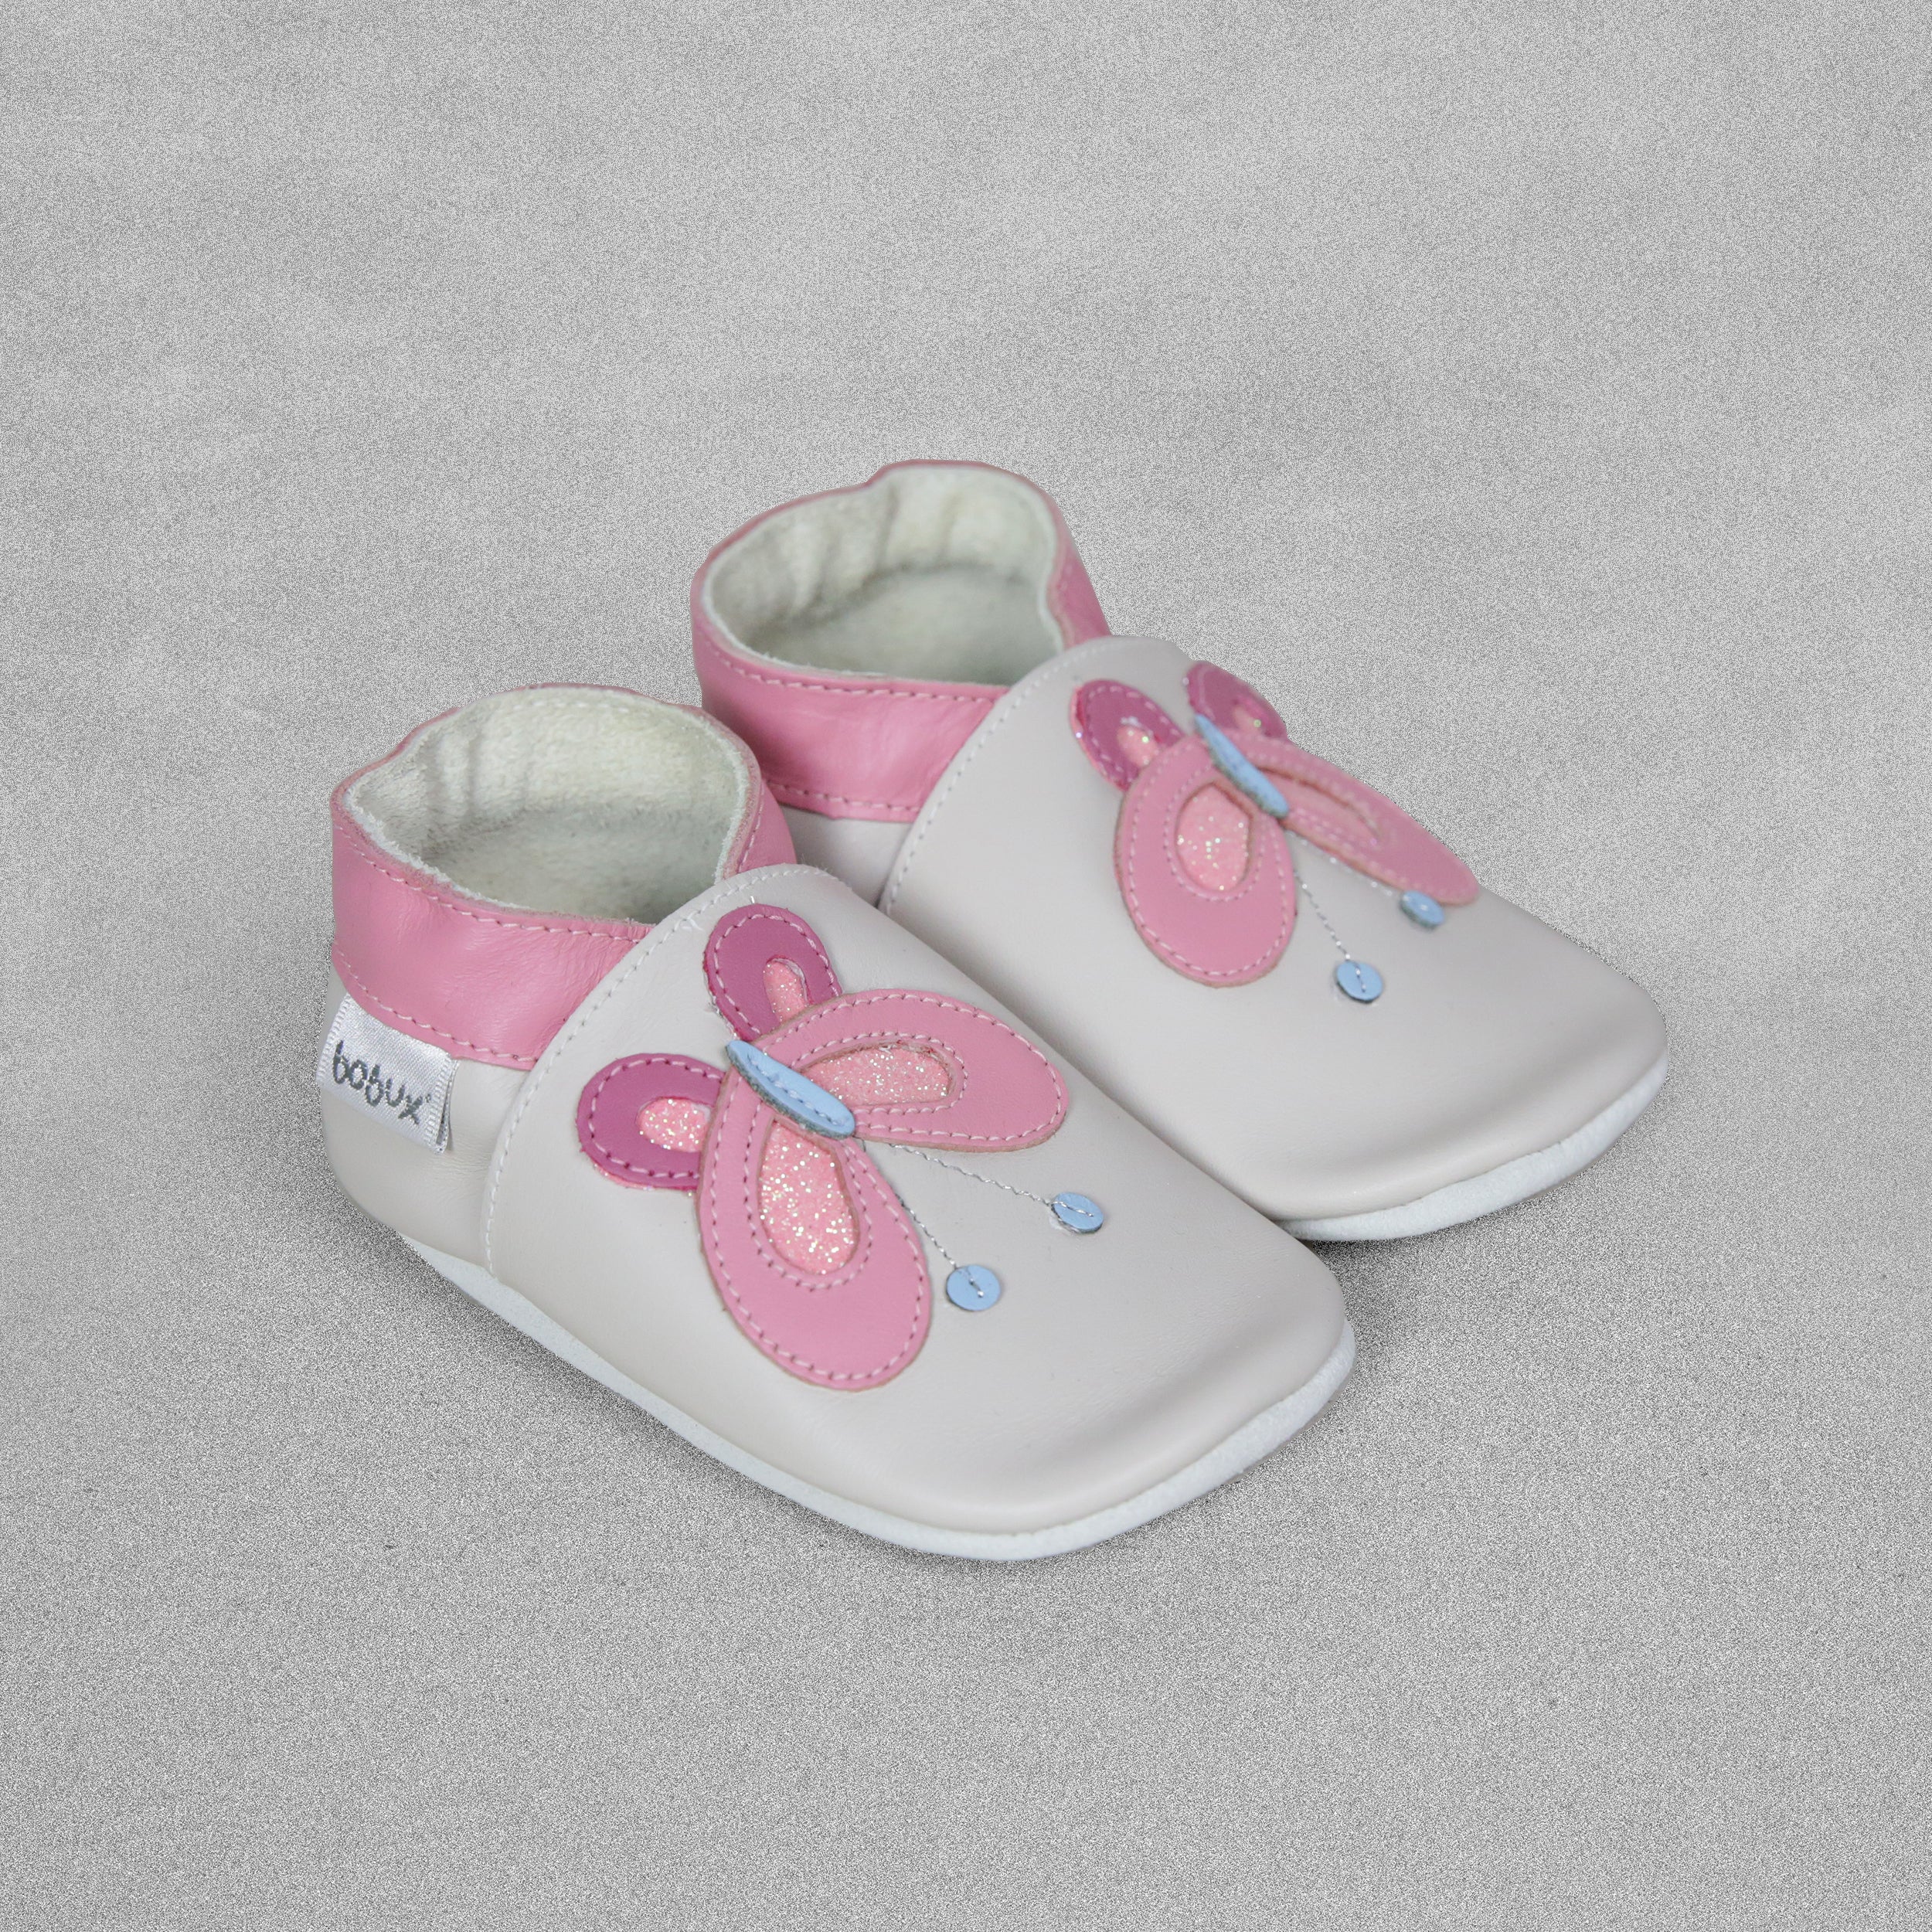 Bobux Soft Sole Baby Shoe 'Milk Butterfly' - Large /15-21 Months